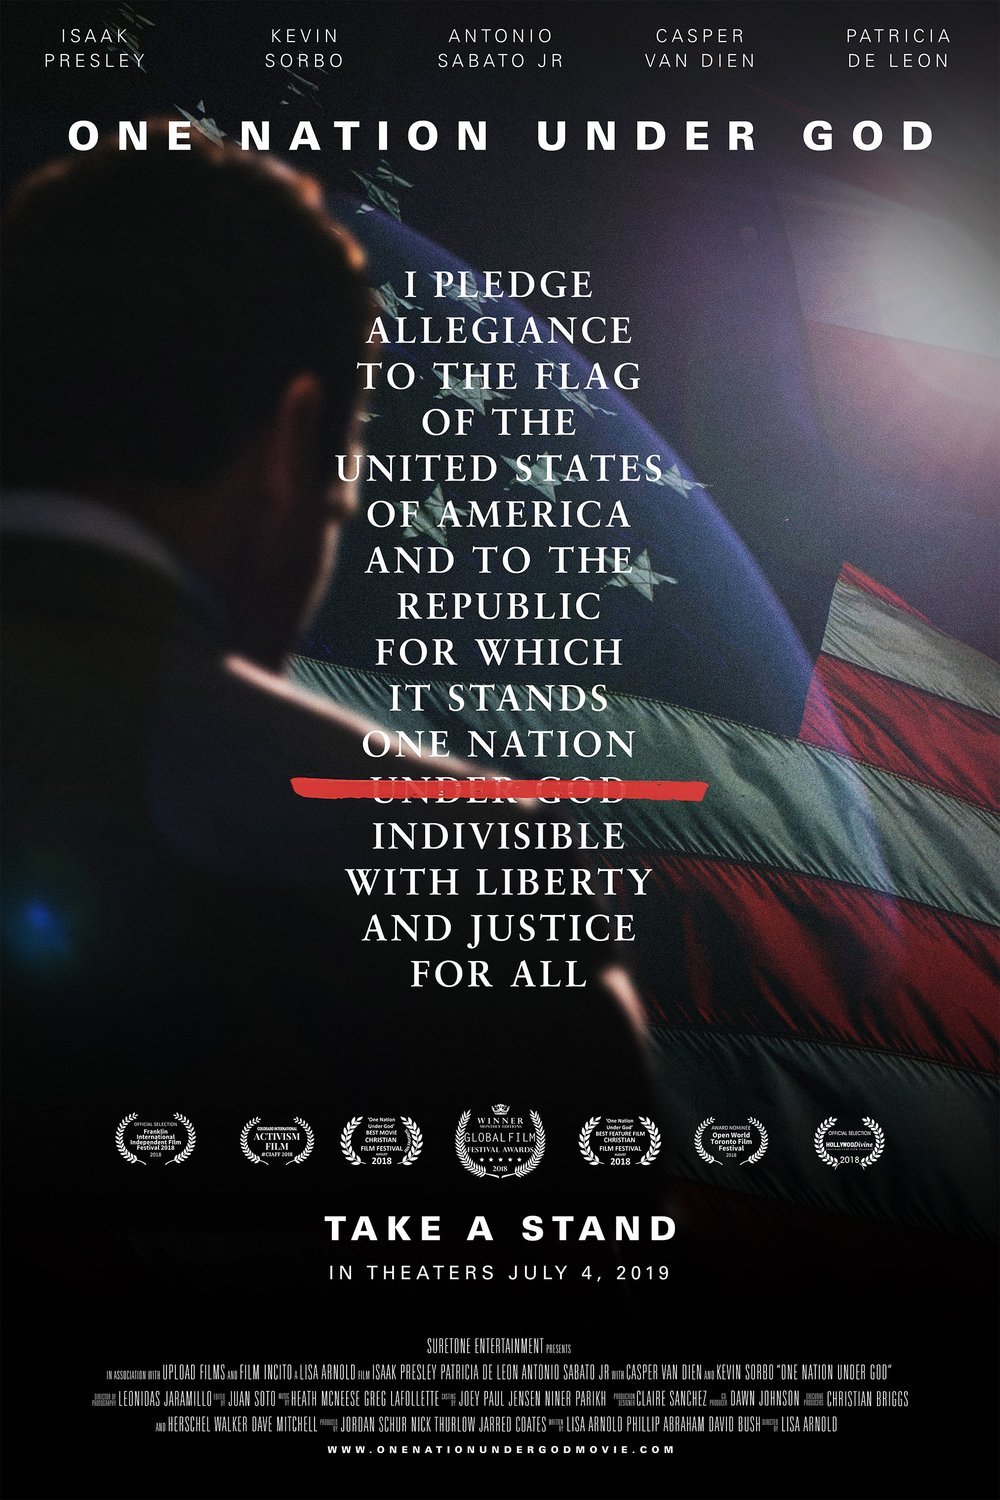 Poster of the movie One Nation Under God